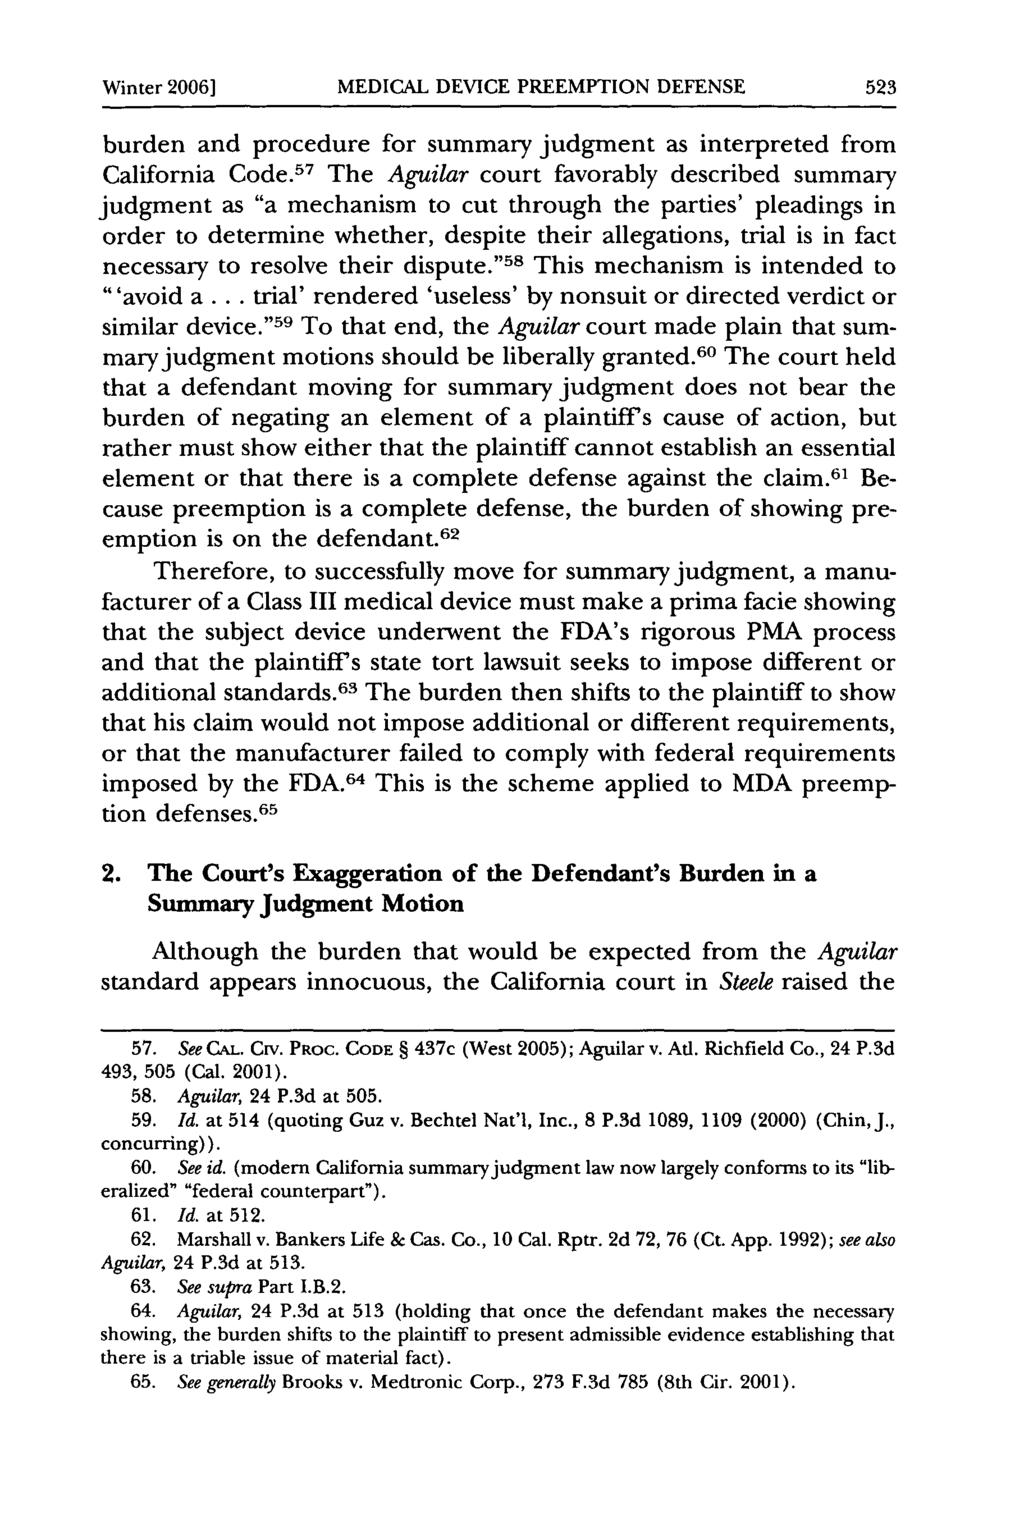 Winter 2006] MEDICAL DEVICE PREEMPTION DEFENSE burden and procedure for summary judgment as interpreted from California Code.